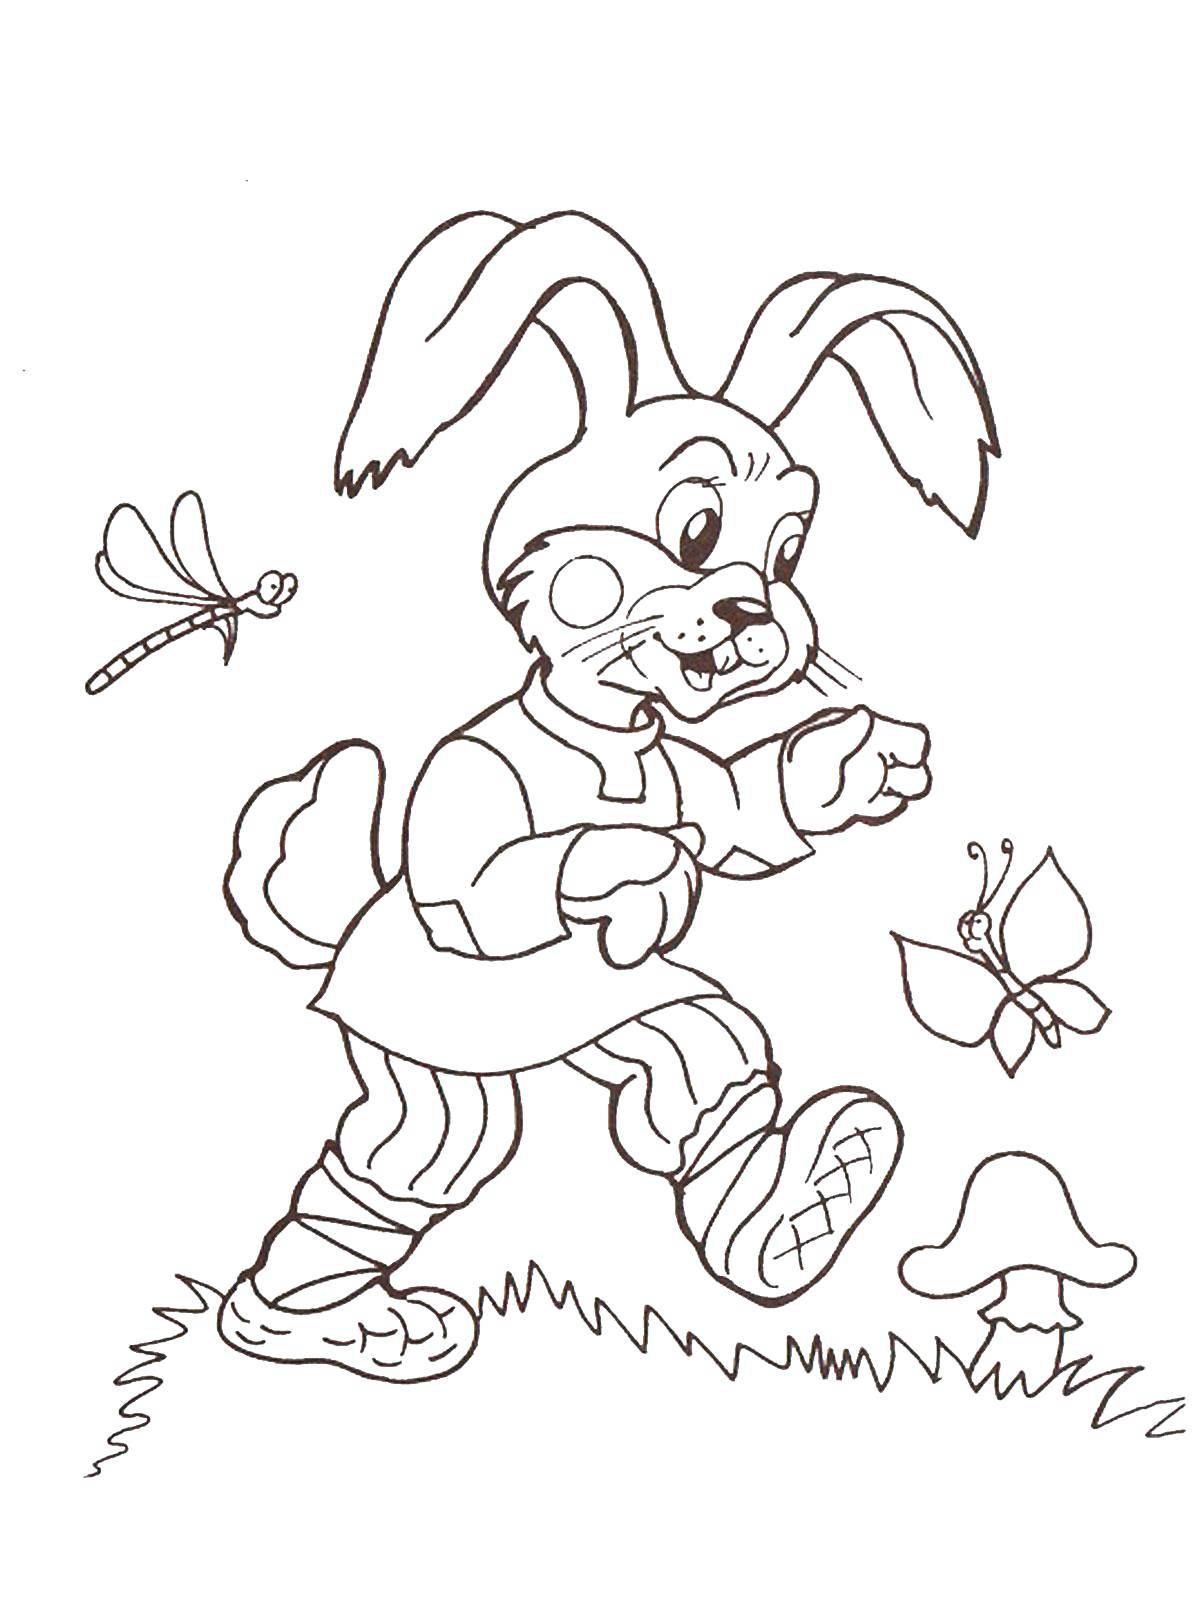 Coloring Funny Bunny. Category gingerbread man . Tags:  Fairy Tales, Gingerbread Man.